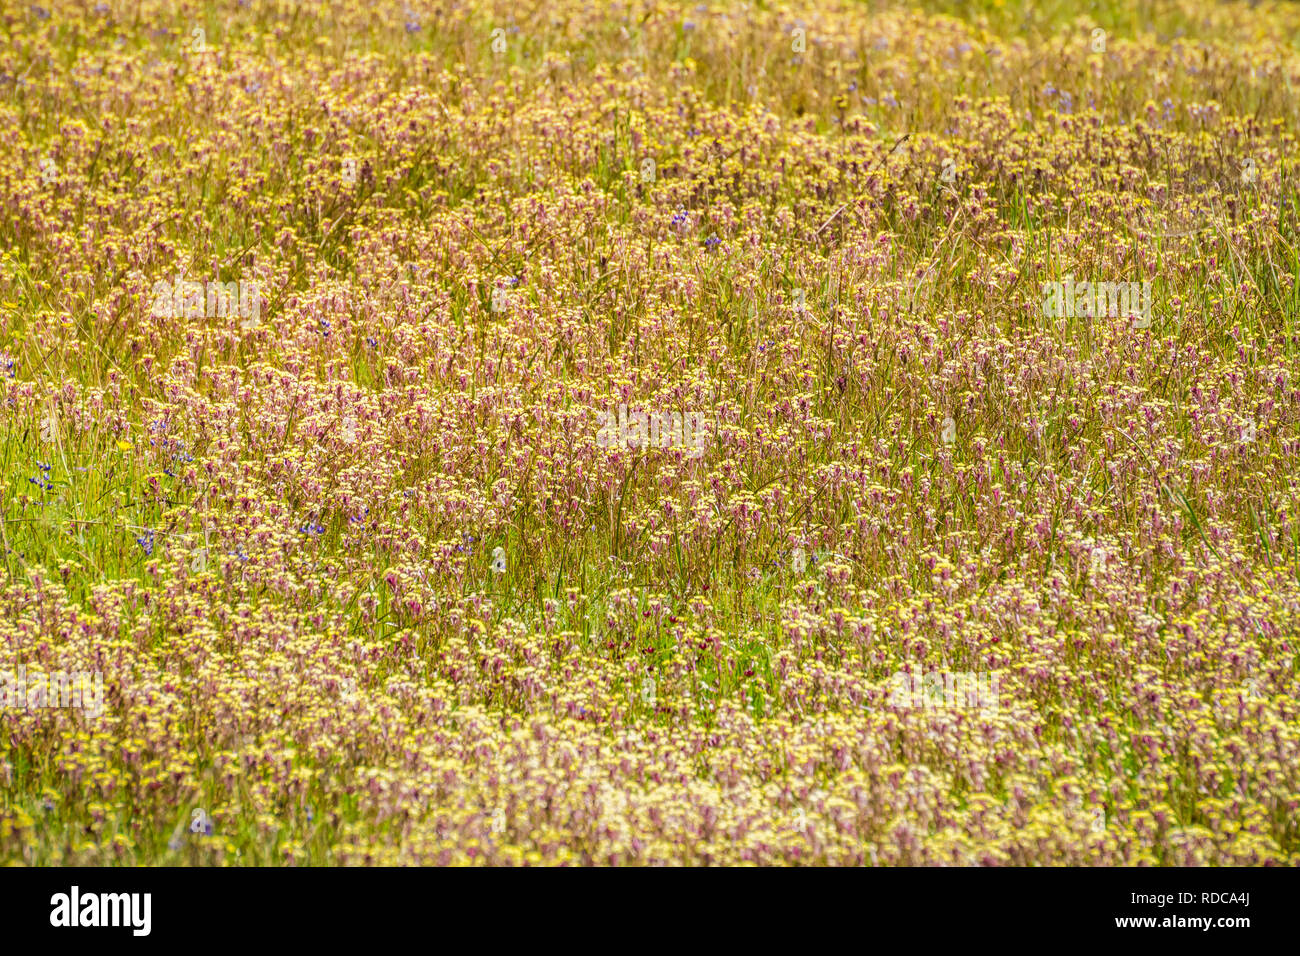 Field of Butter'n'eggs (Triphysaria eriantha) wildflowers, California Stock Photo